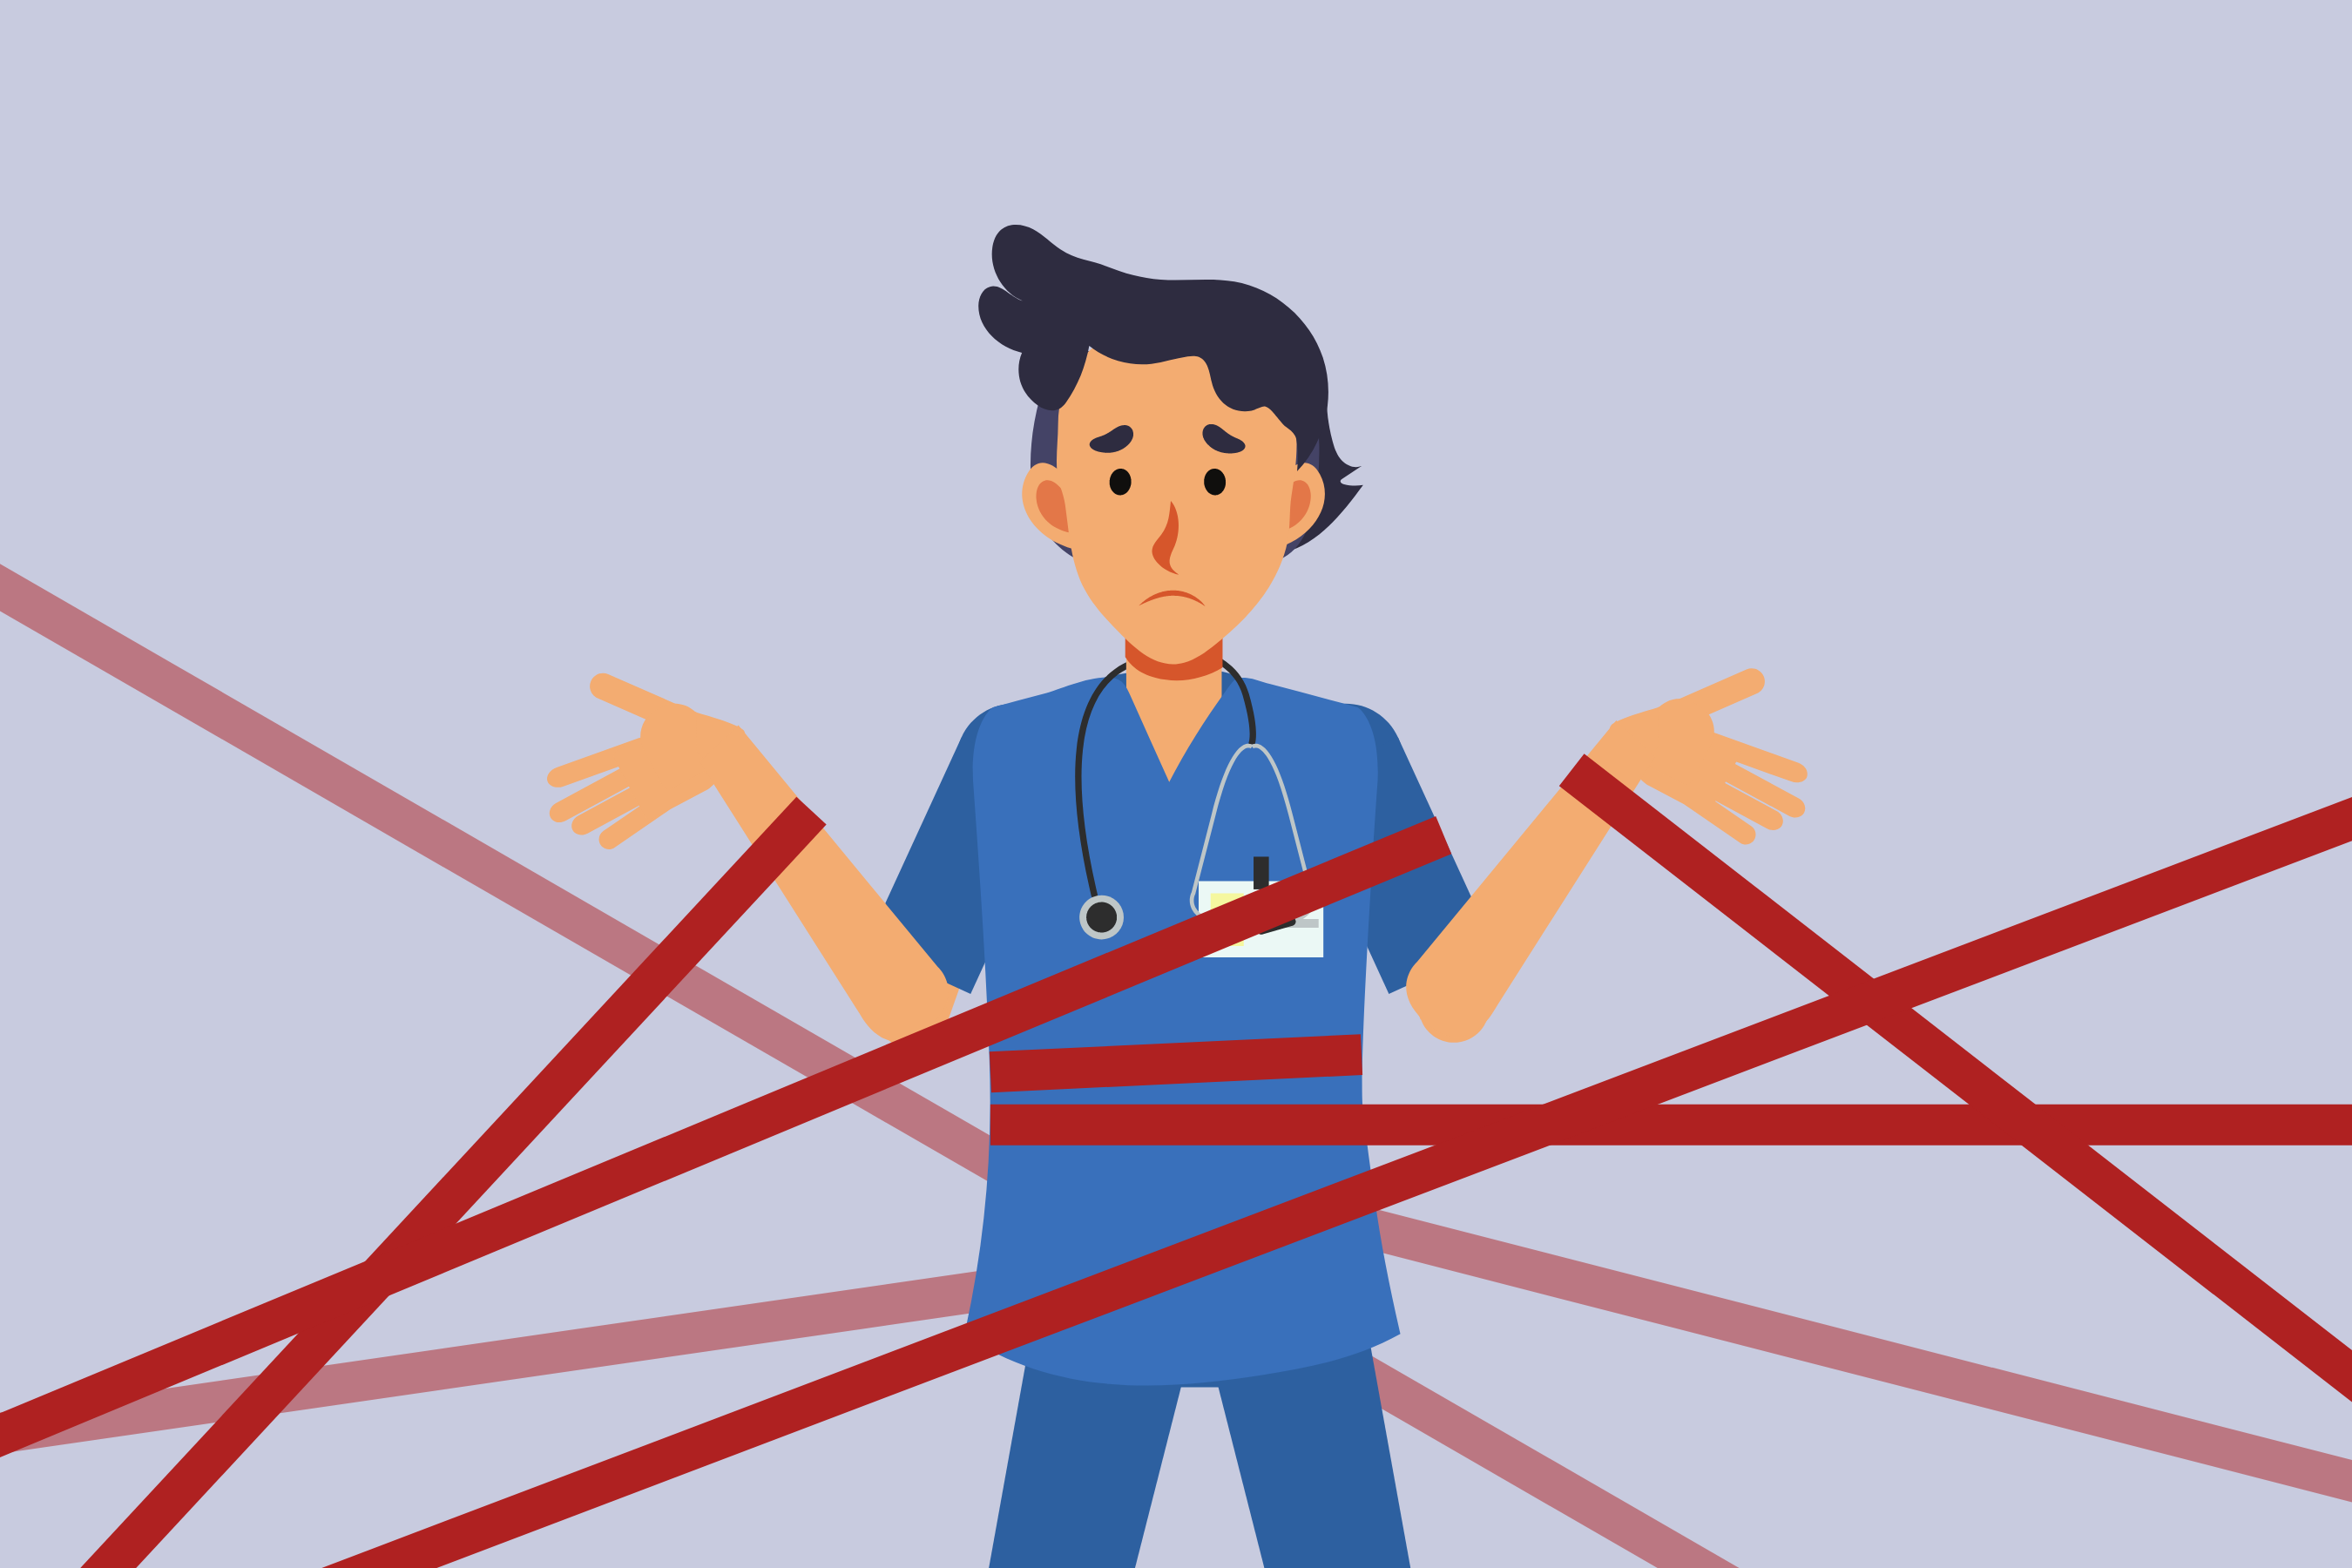 Physician caught up in red tape and distressed